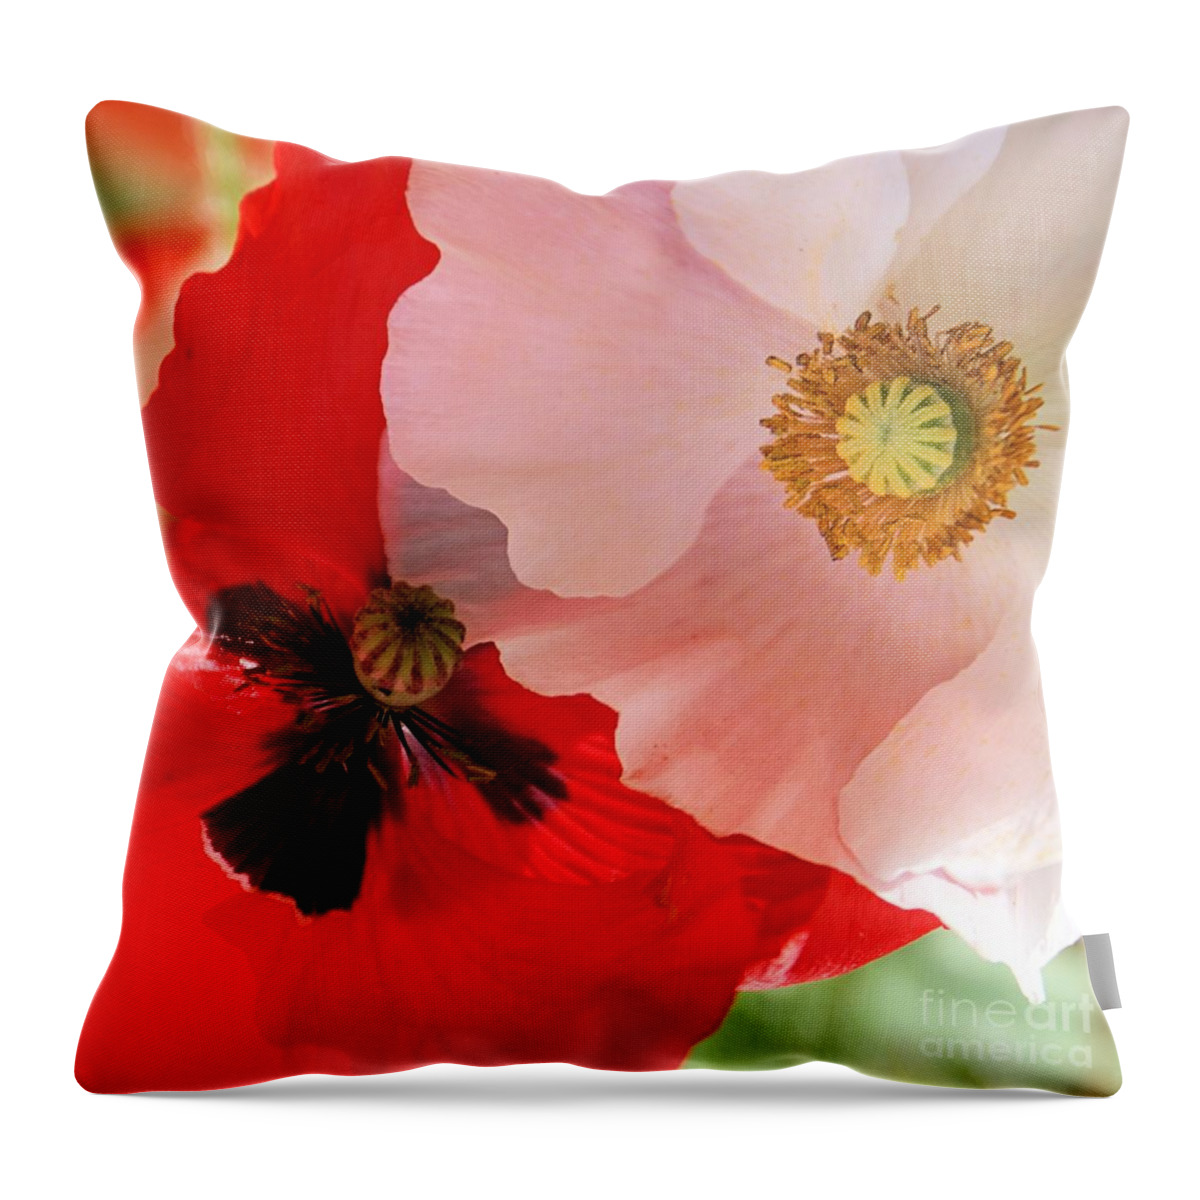 Poppy Throw Pillow featuring the photograph Poppy Pair by Kim Yarbrough